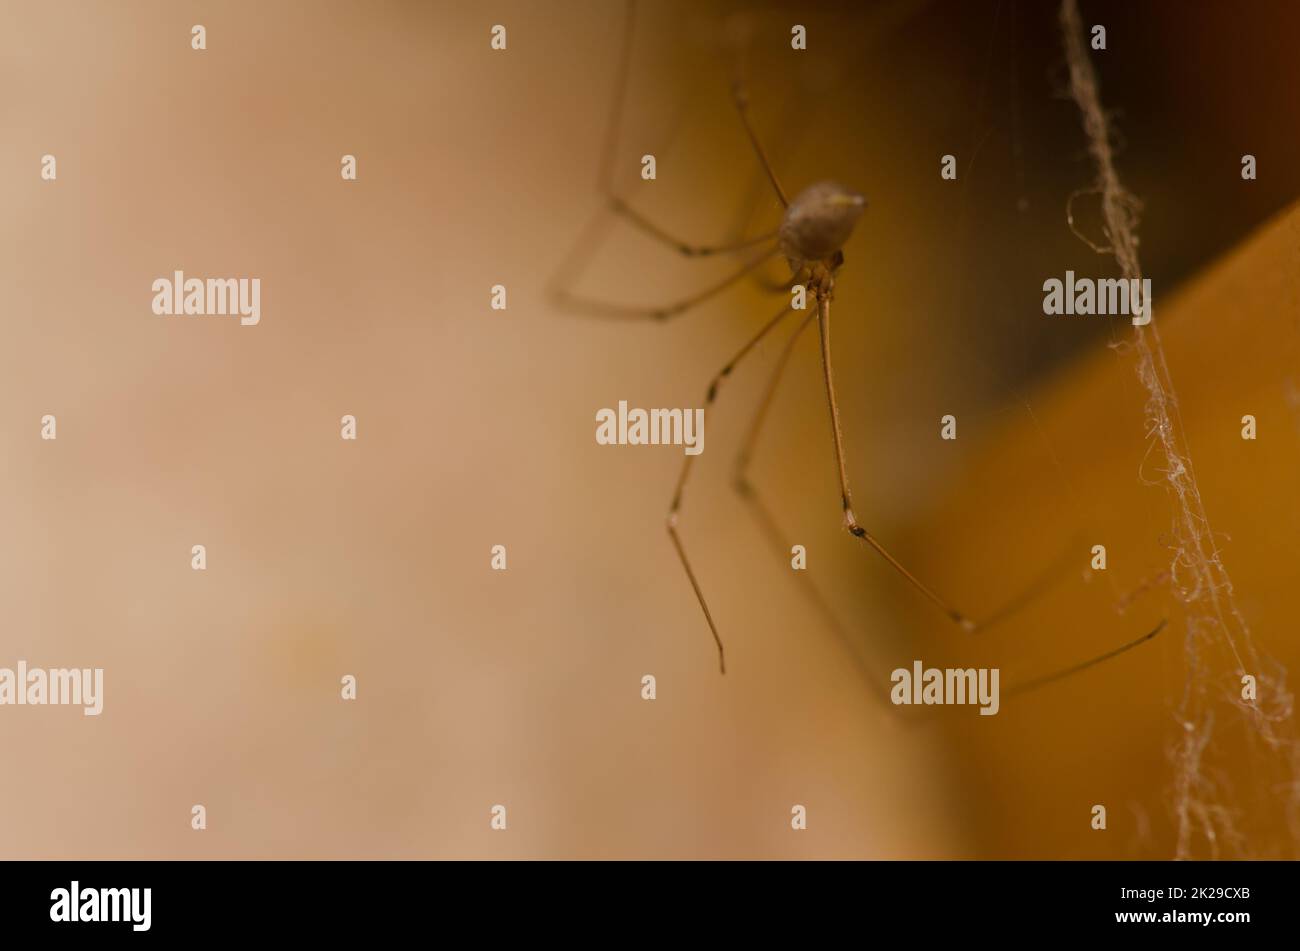 Daddy long-legs spider Pholcus phalangioides. Stock Photo